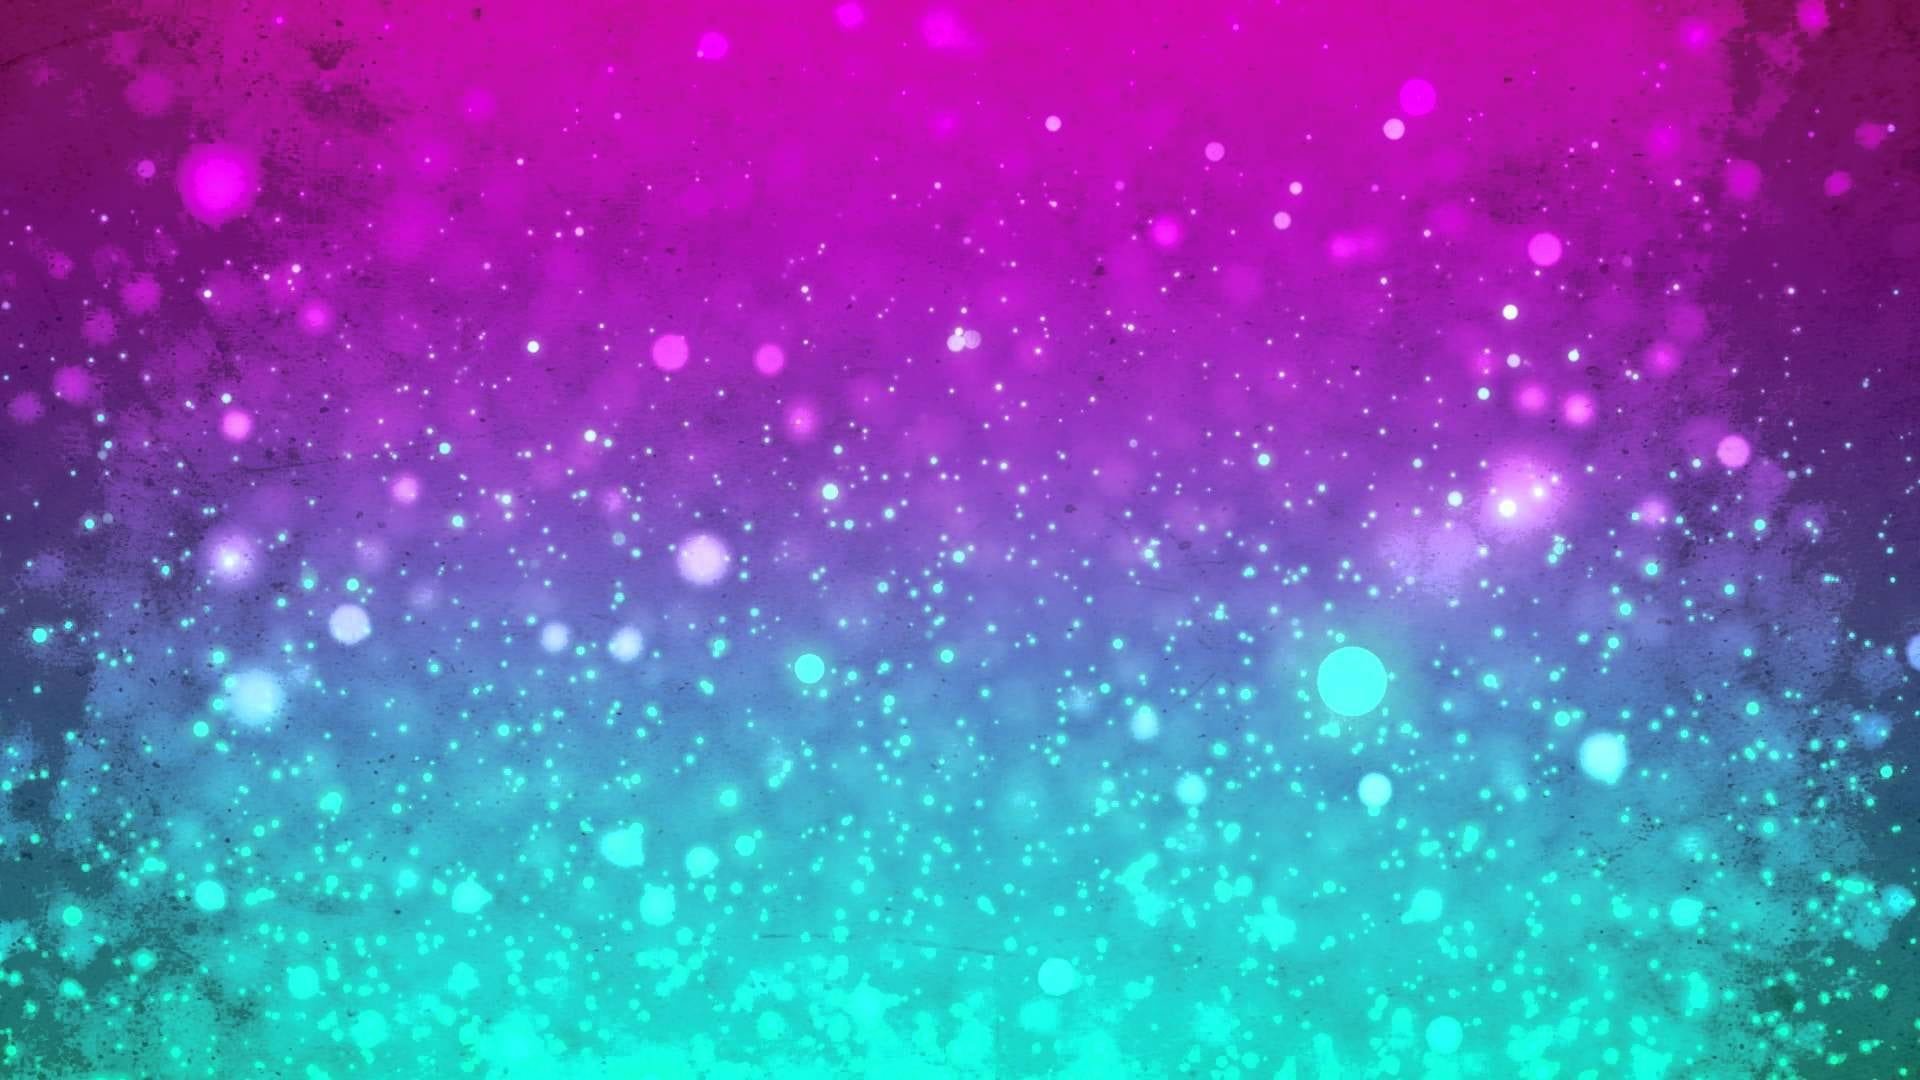 1920x1080 Pink Purple and Turquoise Wallpapers Top Free Pink Purple and Turquoise Backgrounds